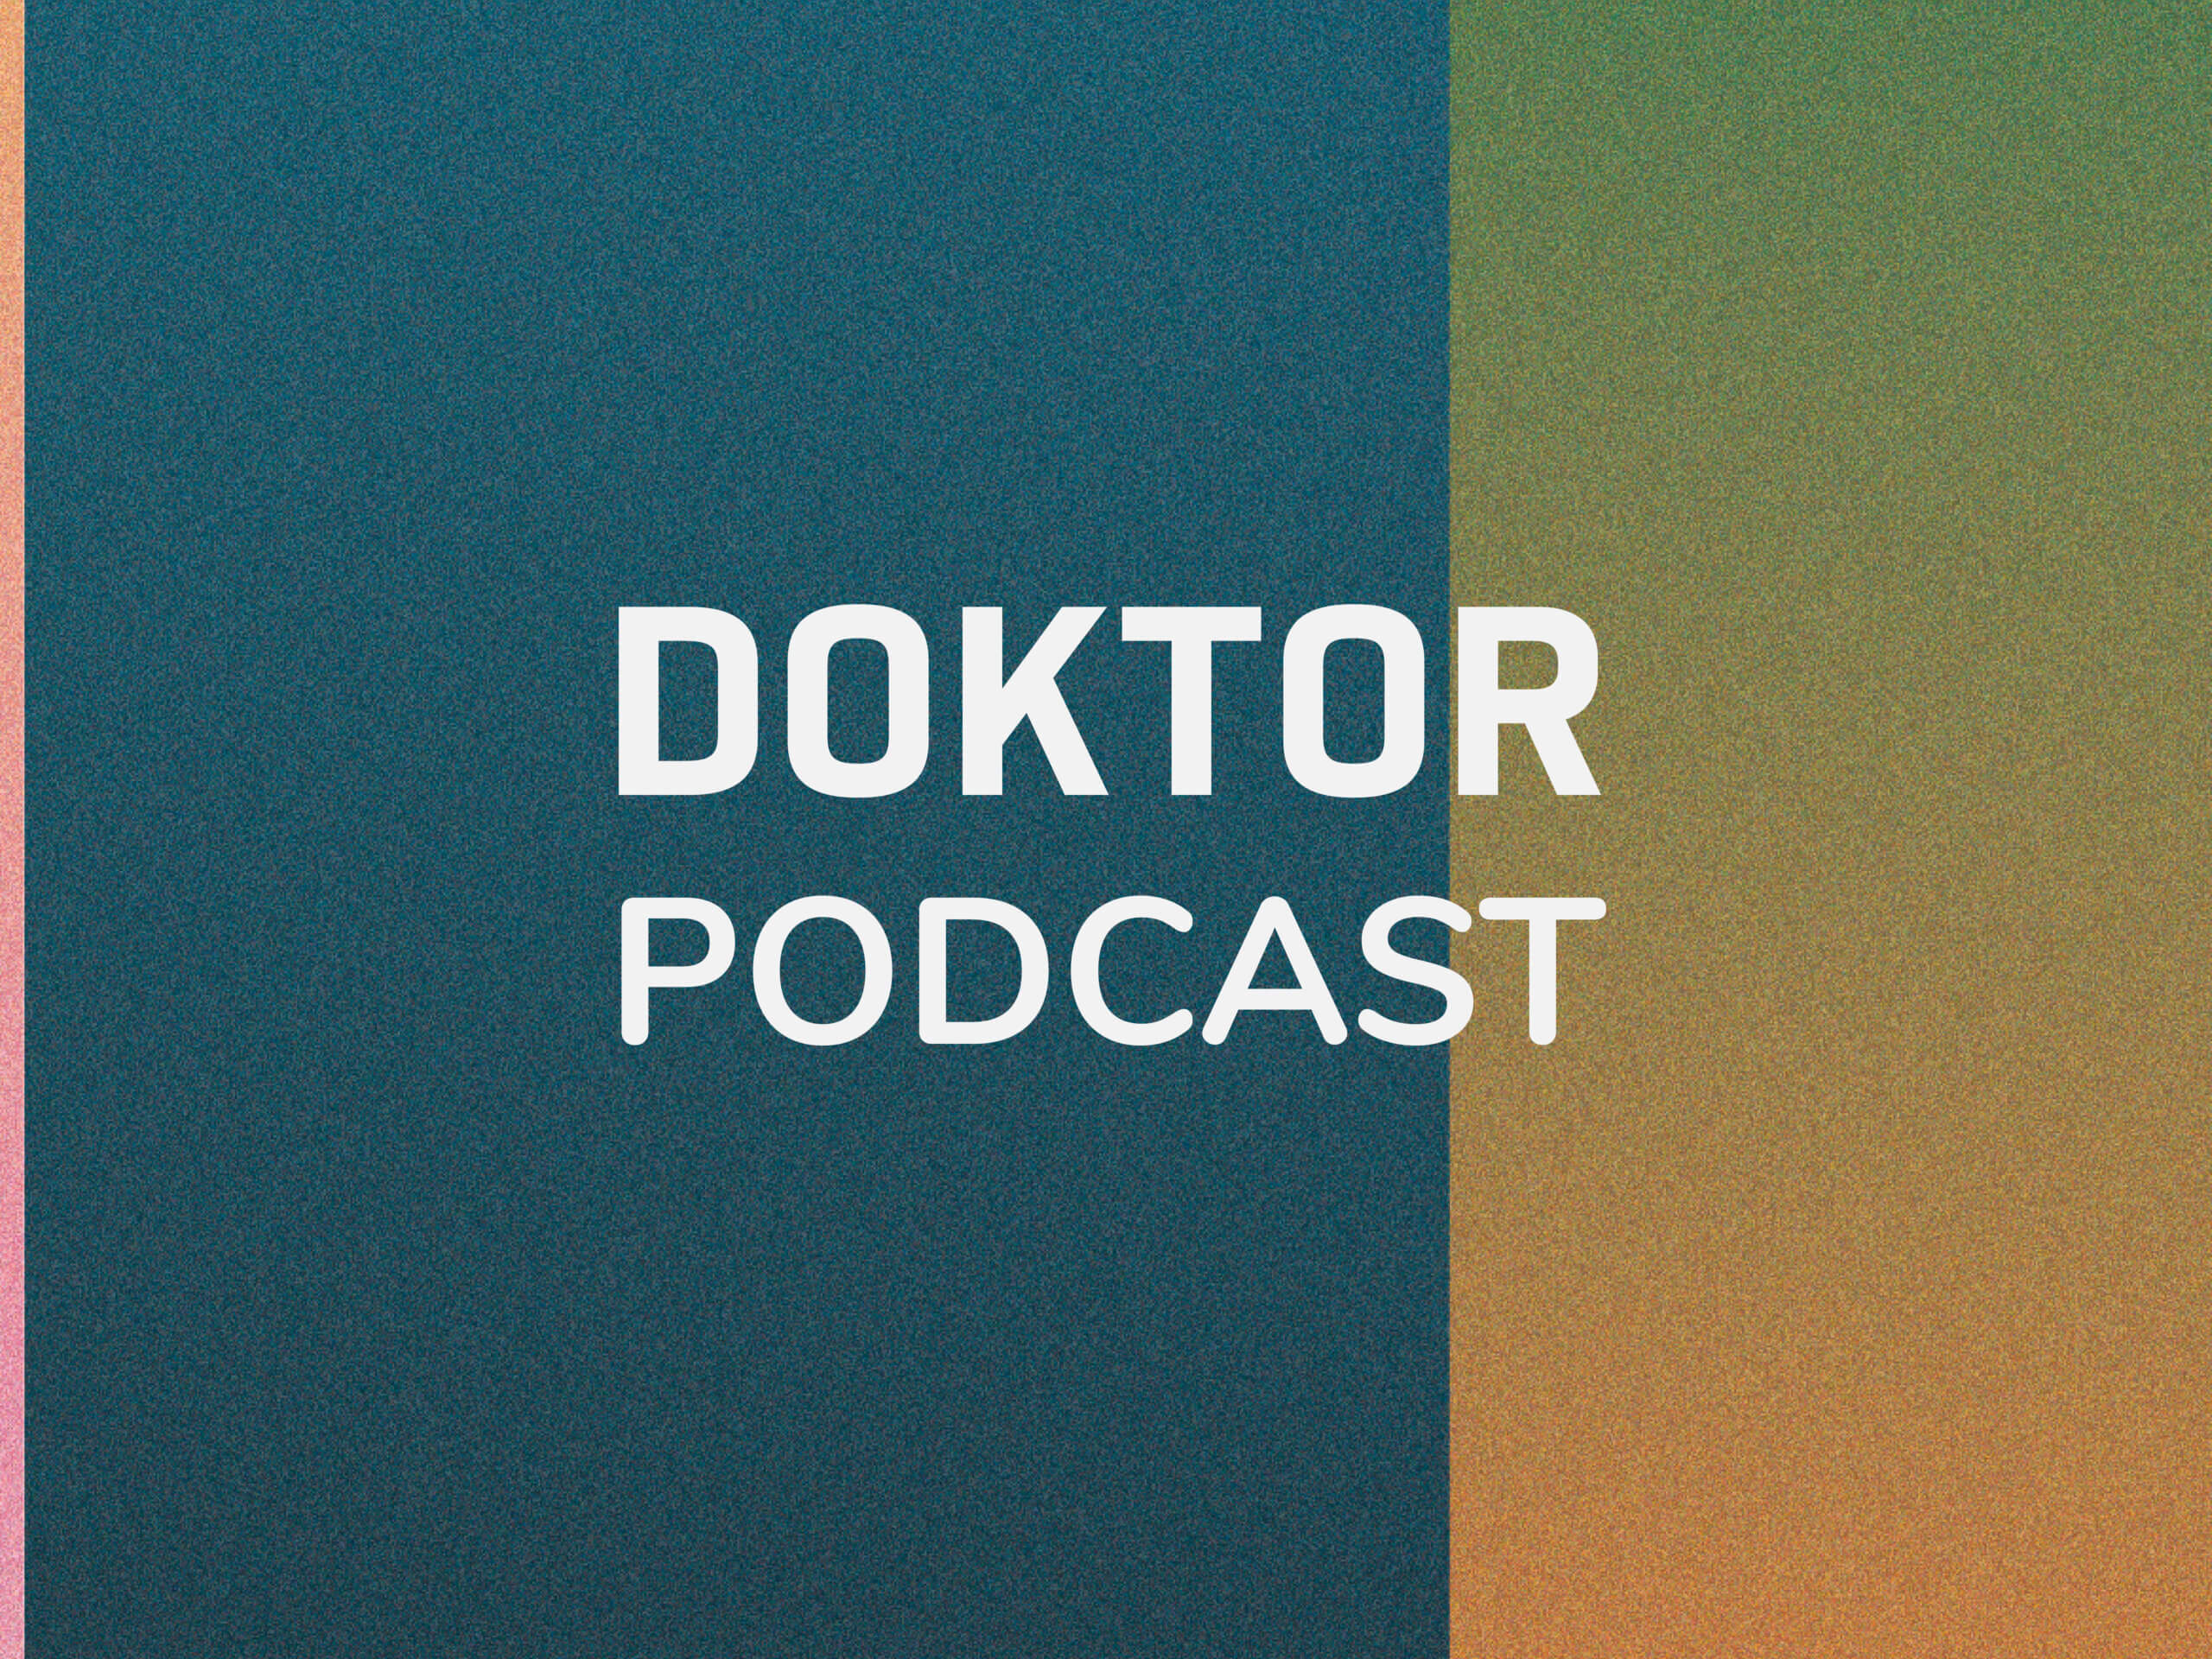 Featured image for “DOKTOR PODCAST”